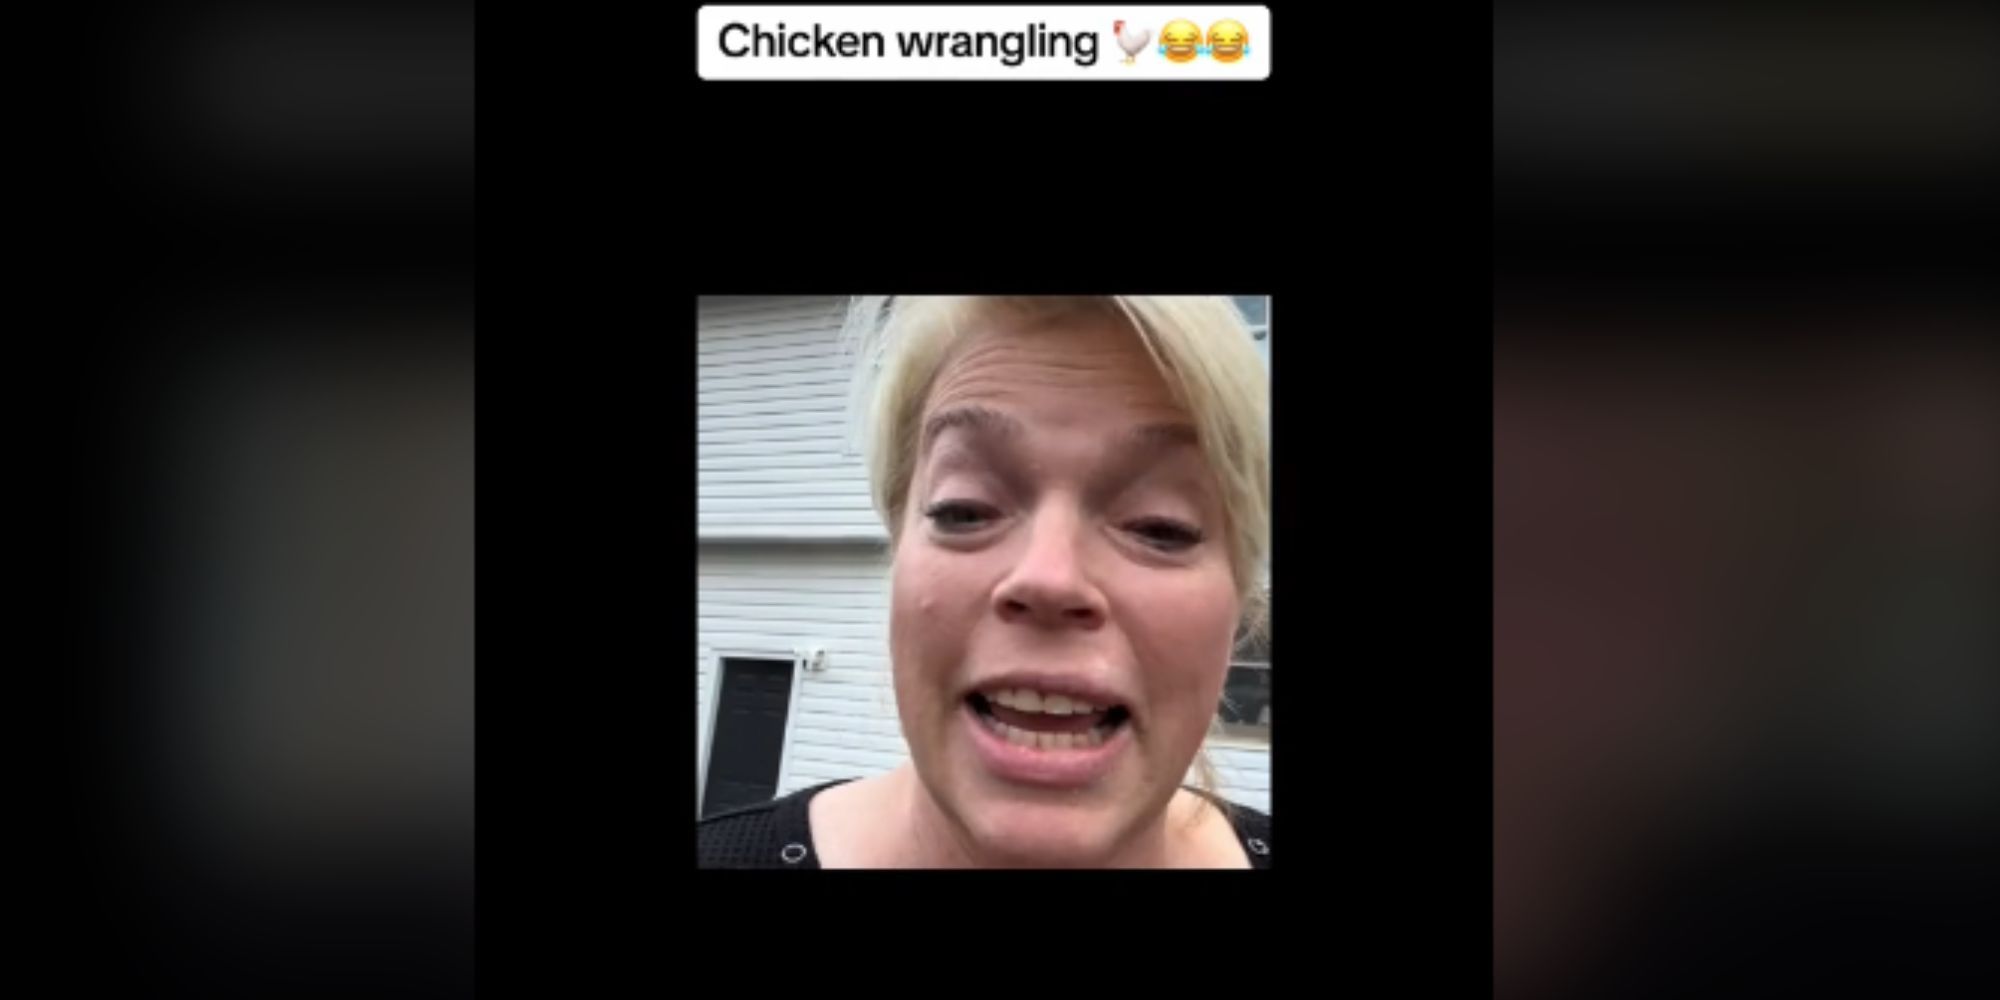 Sister Wives Janelle brown outside, under the caption: Chicken wrangling